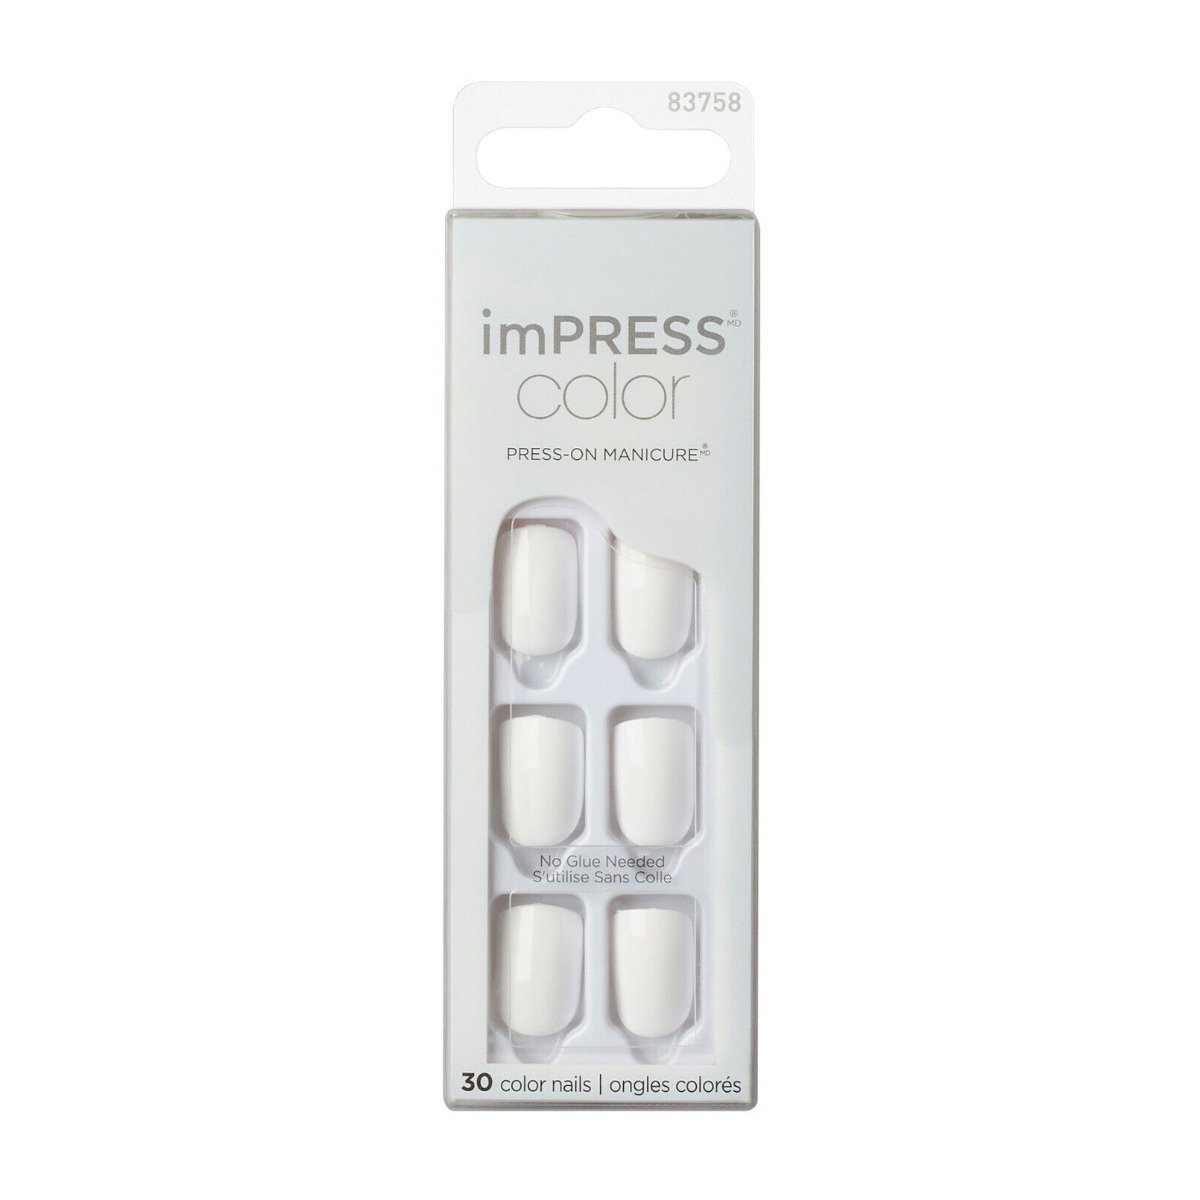 Kiss Impress Color 019 Frosting Nails - 83758 - Bloom Pharmacy